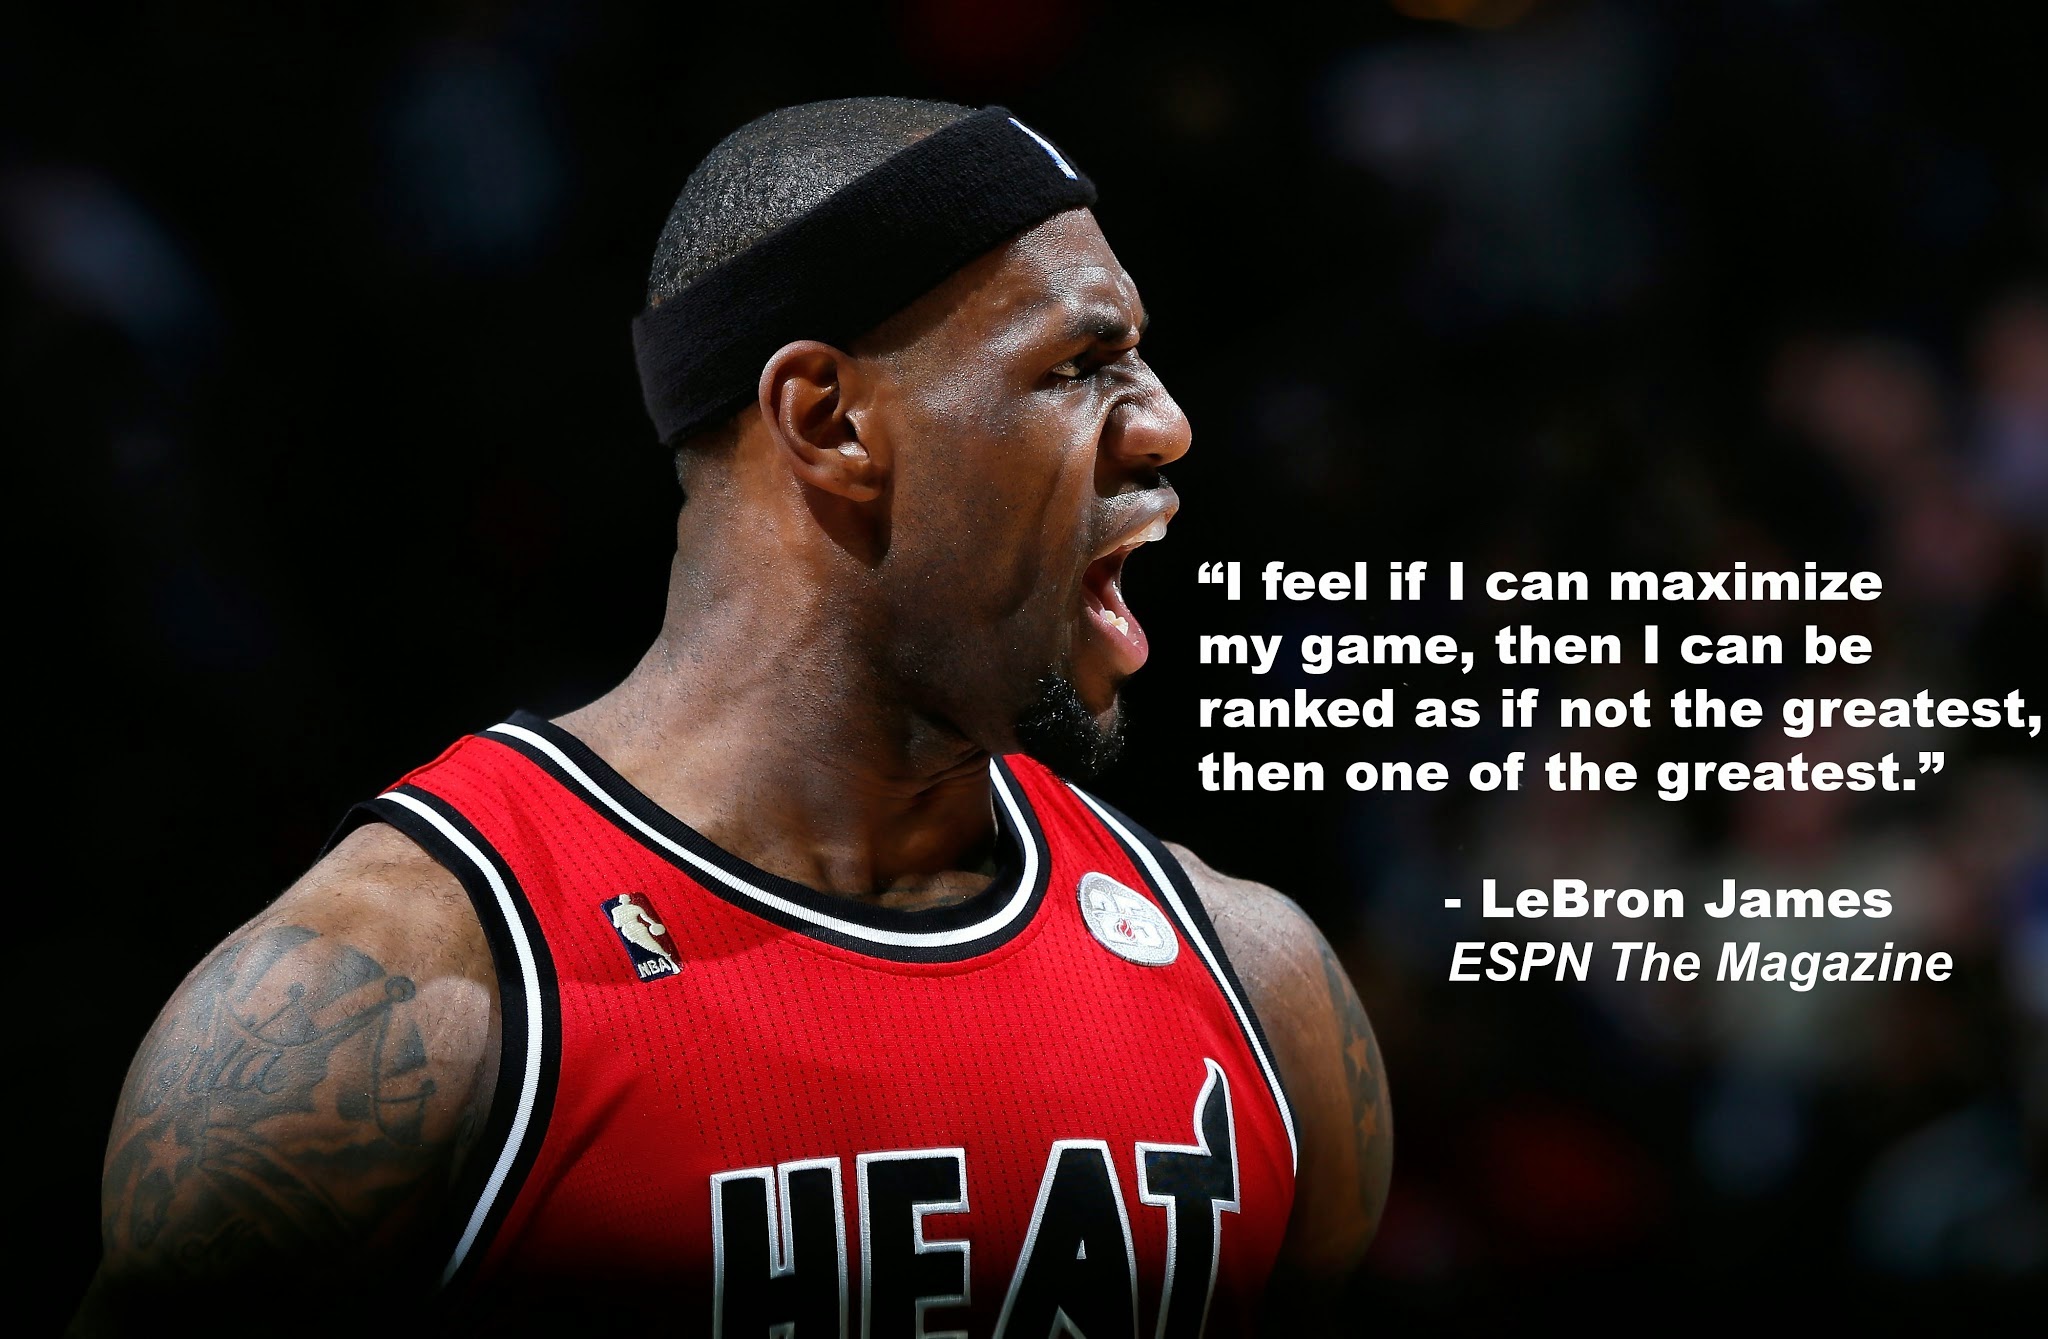 Lebron James Quotes About Sports. QuotesGram